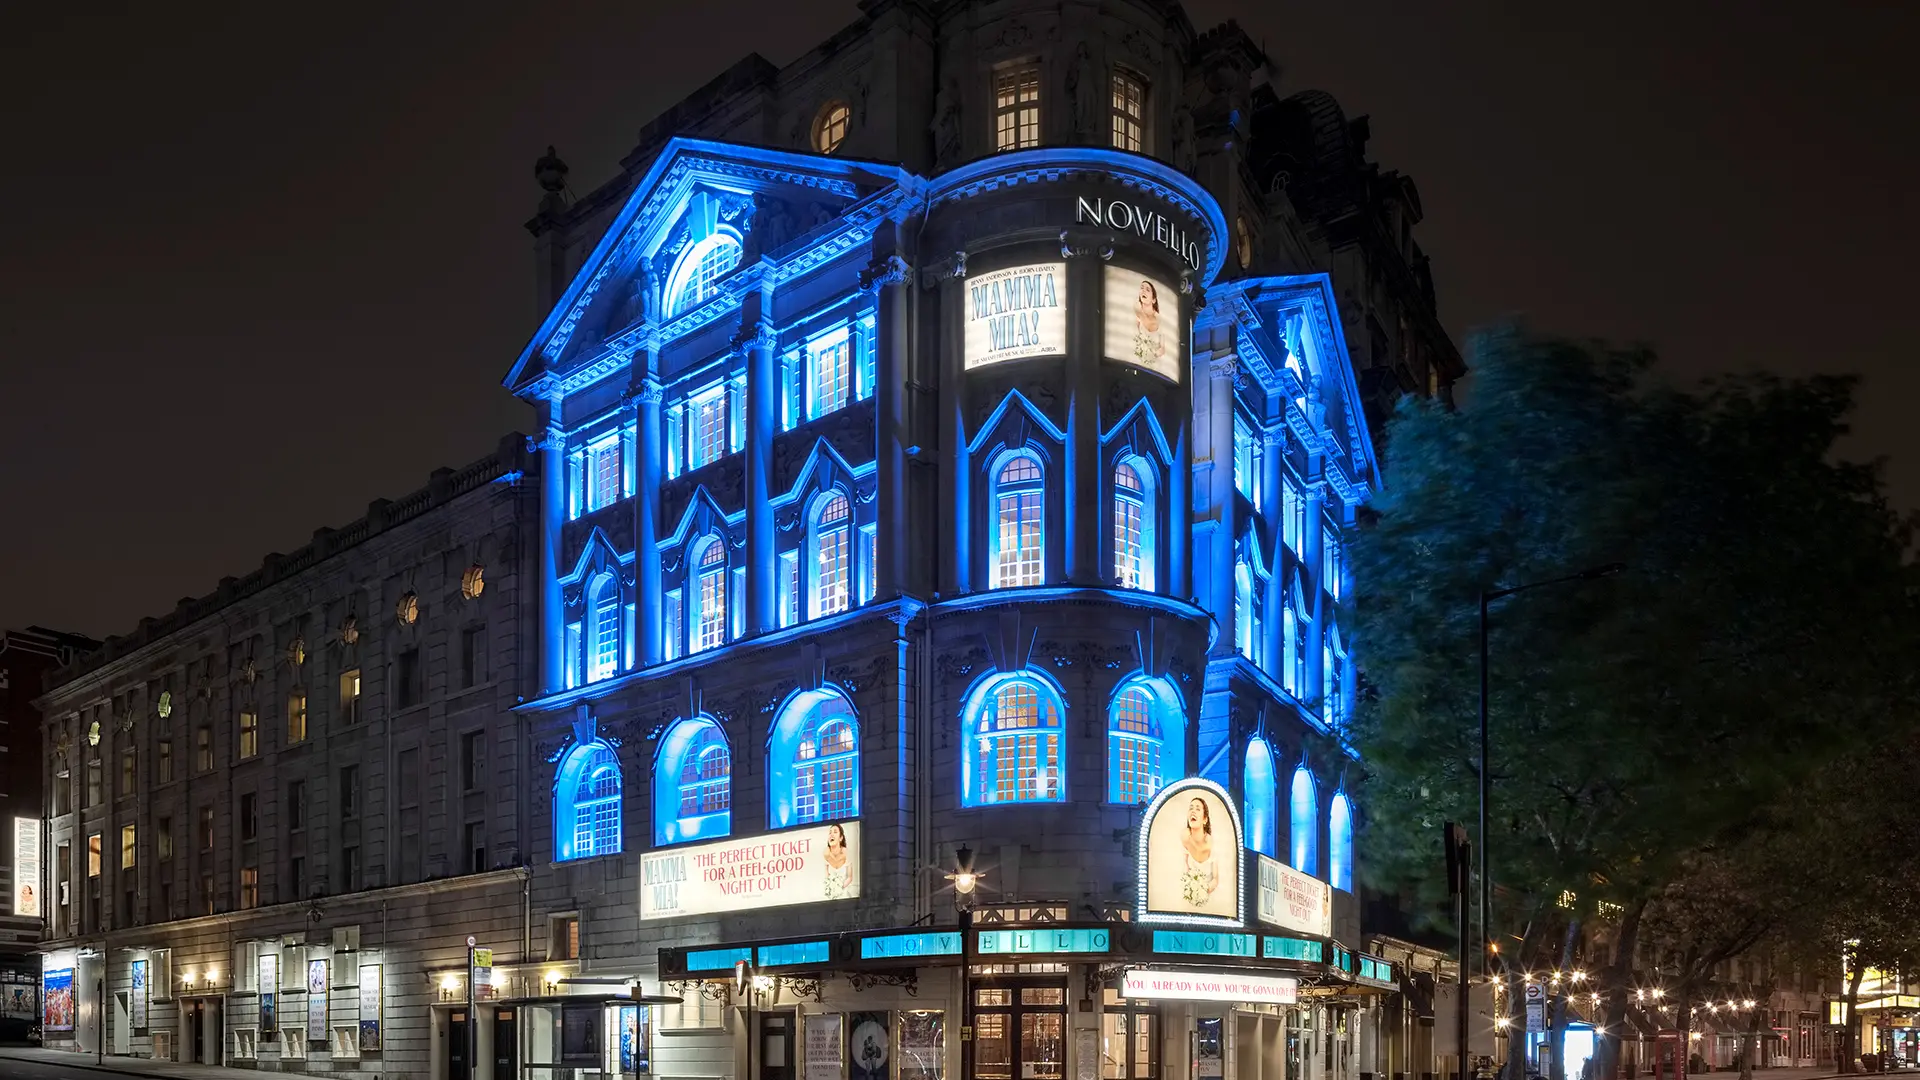 External view of Novello Theatre at night.